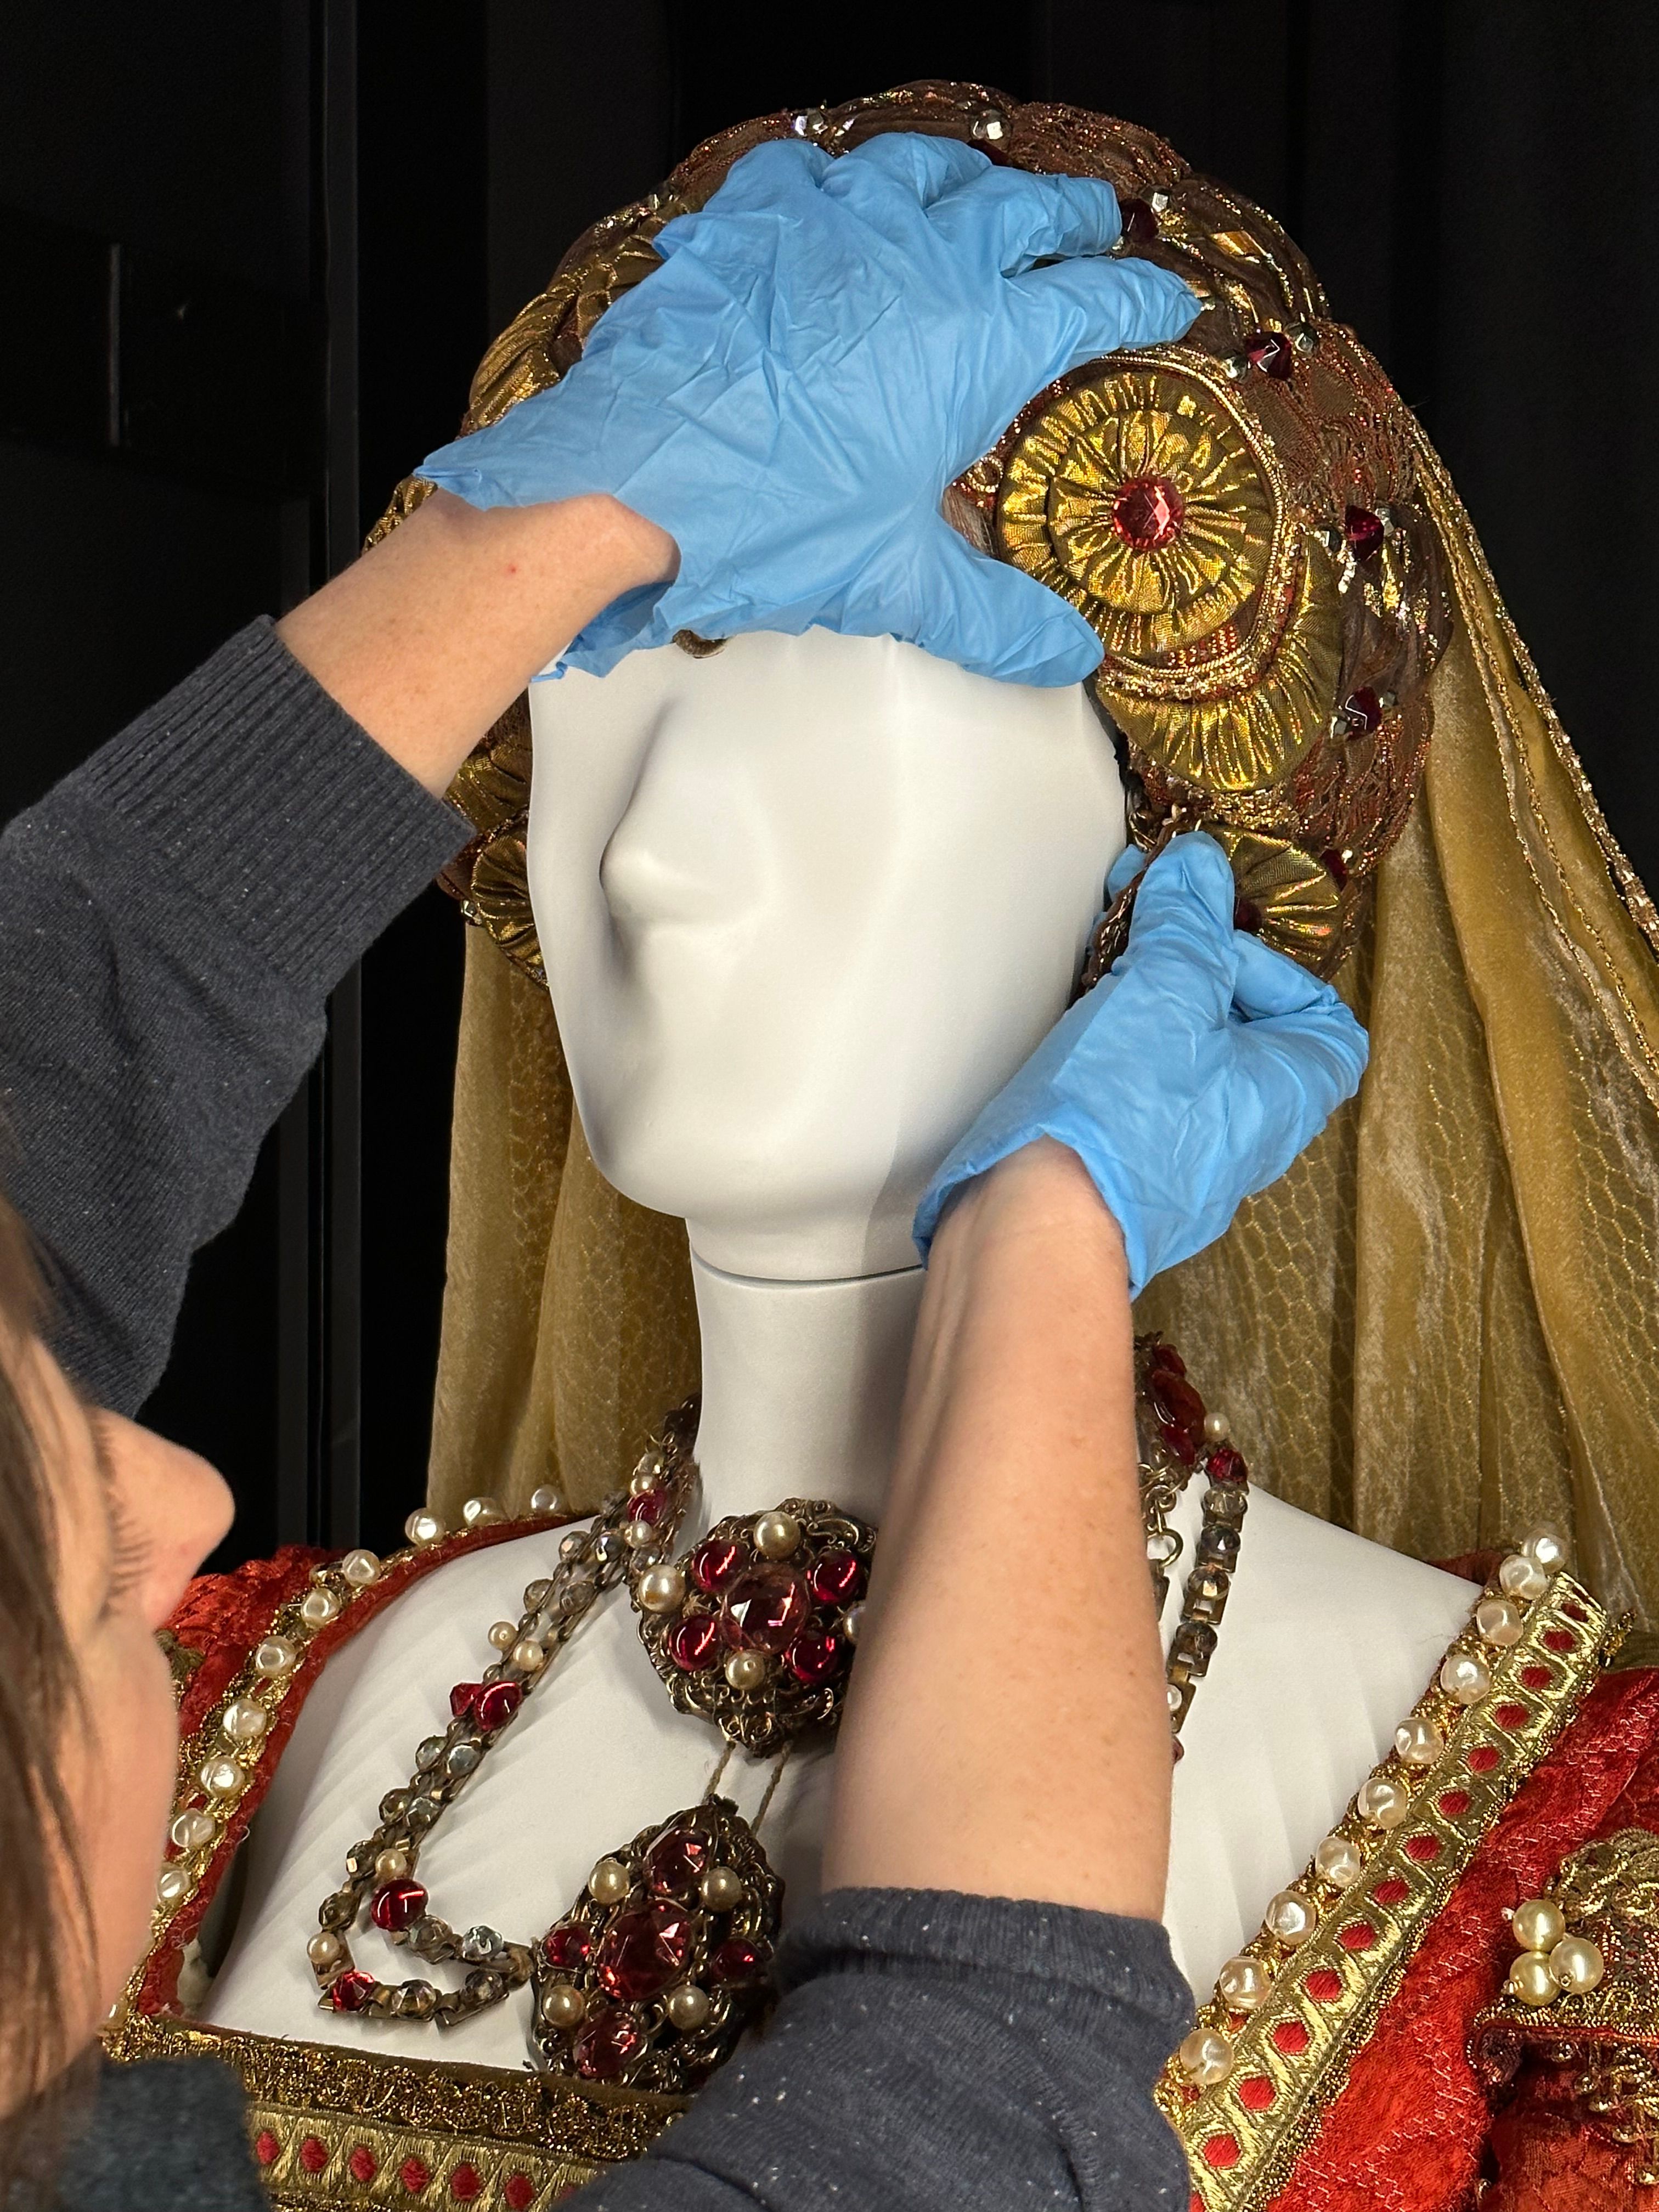 A woman wearing blue gloves is reaching up to secure a gold-coloured headdress on the head of a white-coloured mannequin, on which the shoulders of an elaborate bodice in red material with gold braid, and a necklace resembling gold set with rubies and pearls can also be seen. 